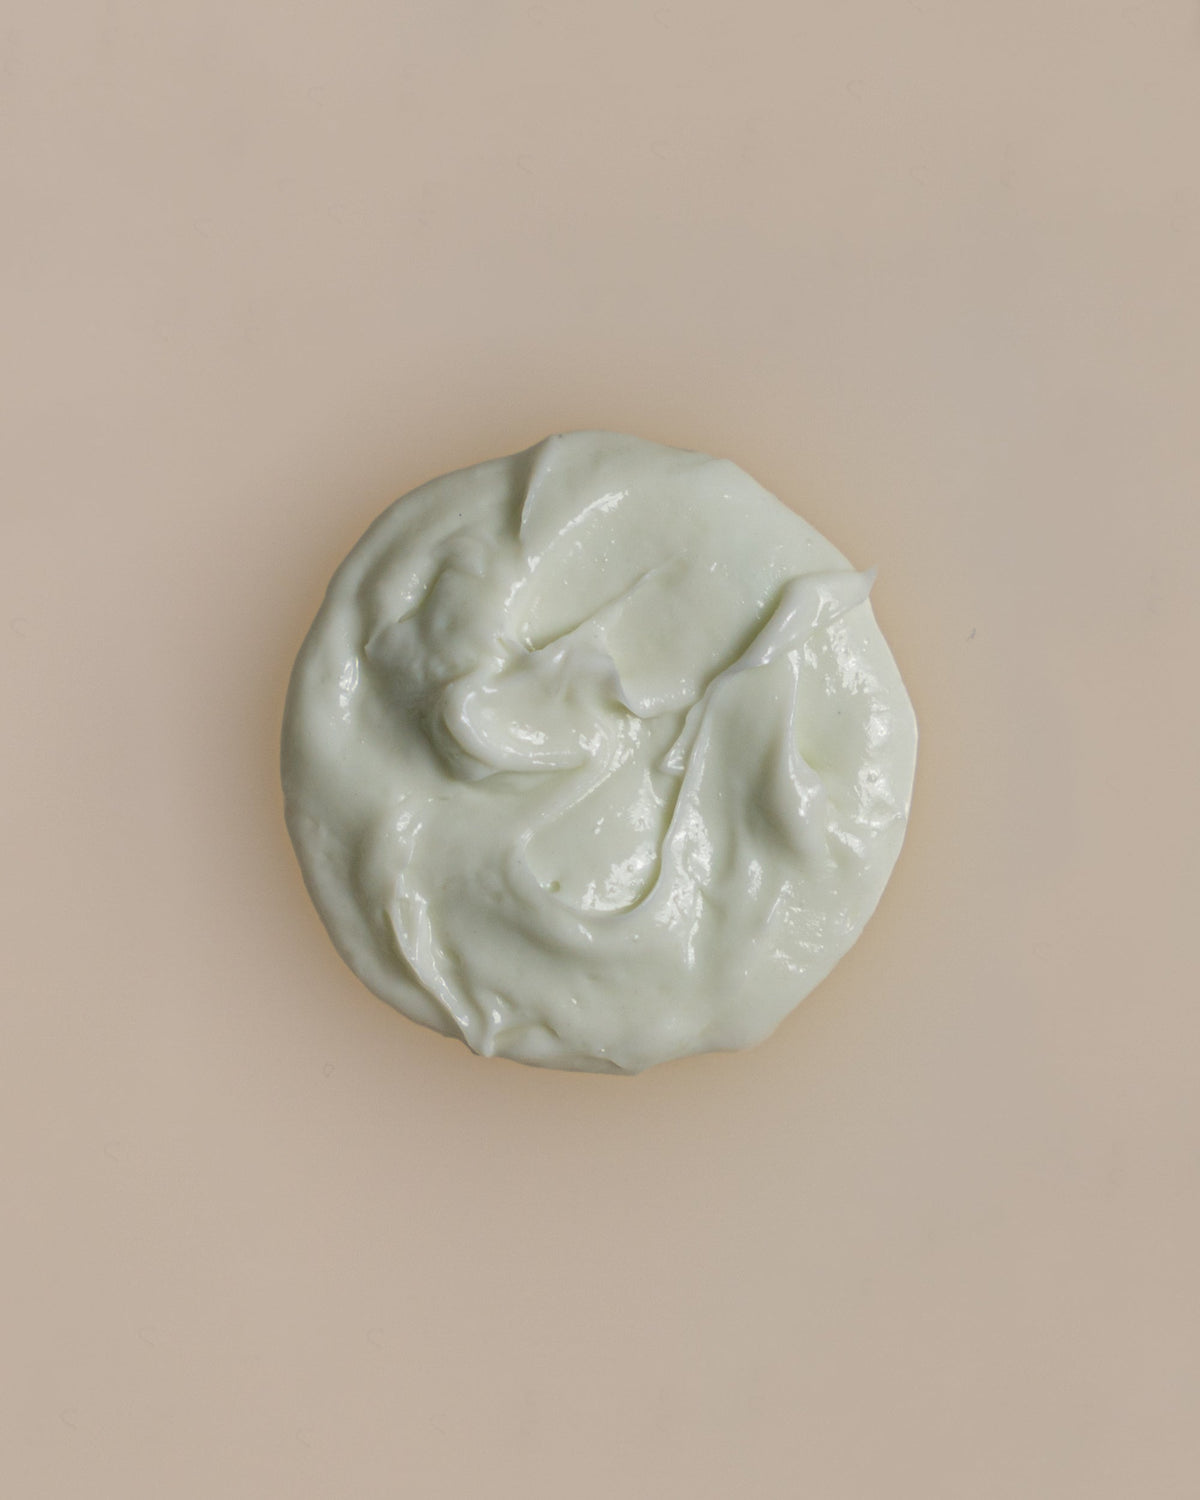 A creamy, swirly light green dollop of Dry Defense Daily Moisturizing Lotion on an off-white surface.